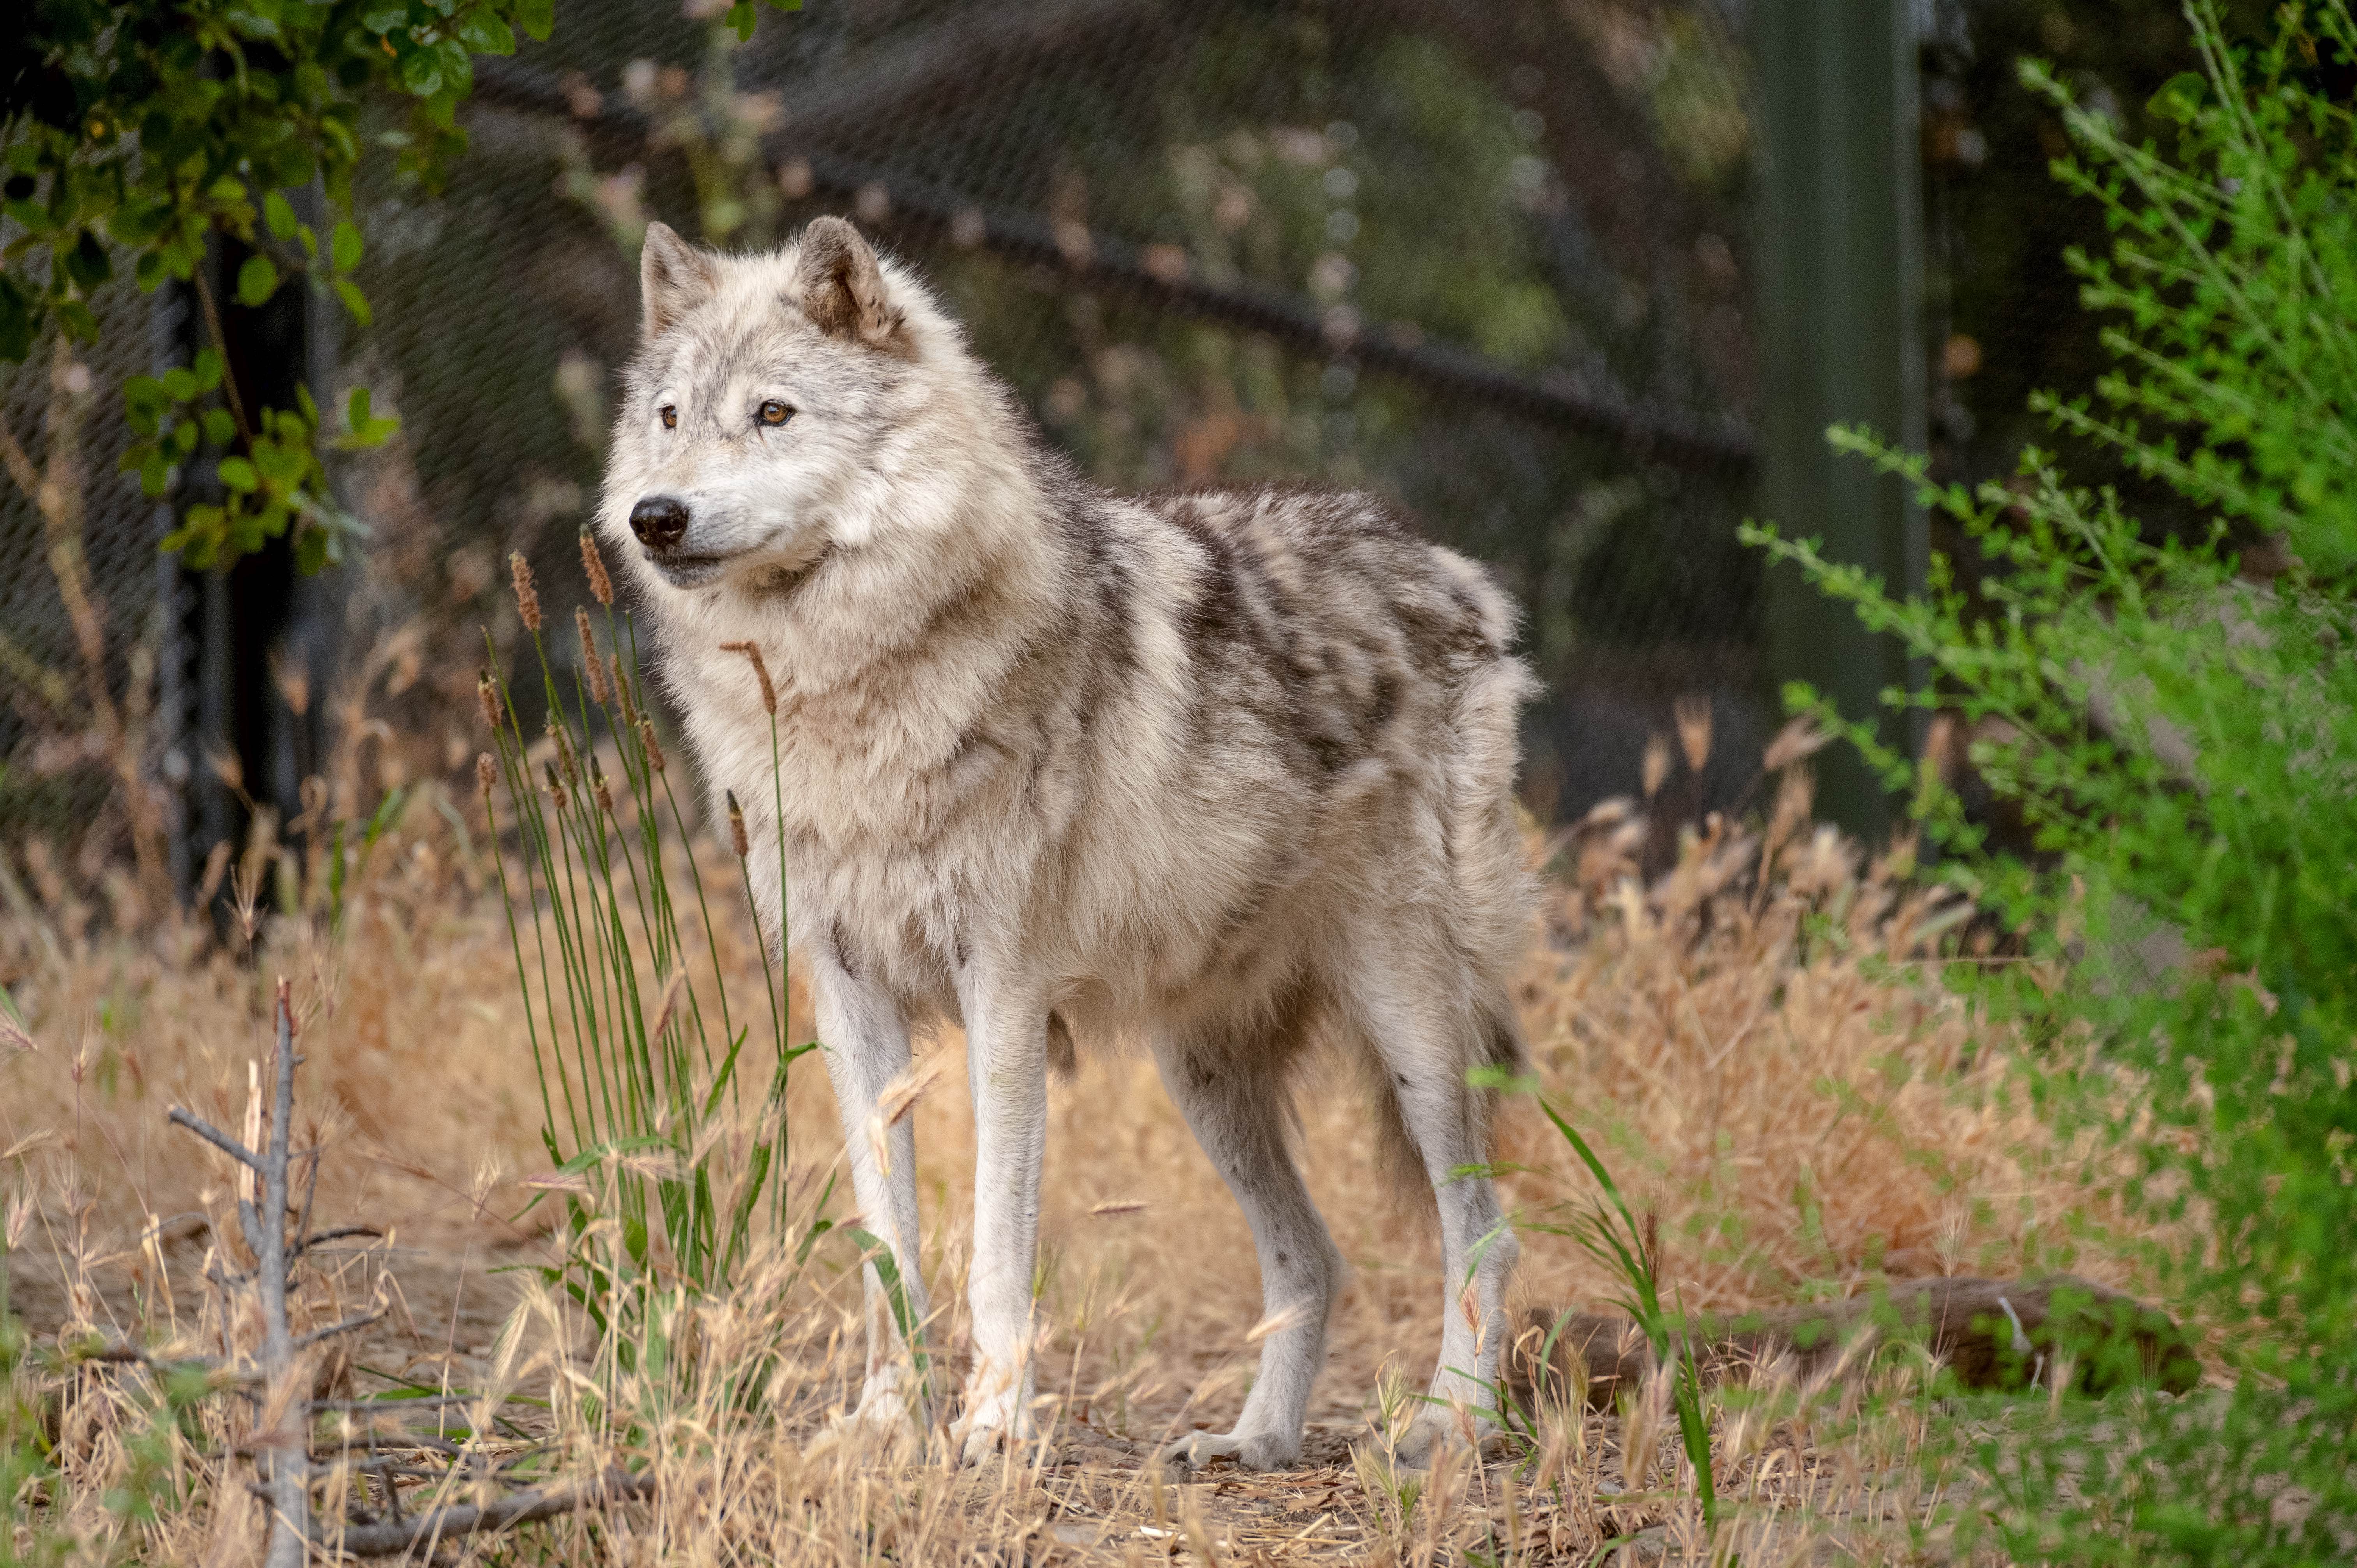 Gray wolf outdoors at a. zoo